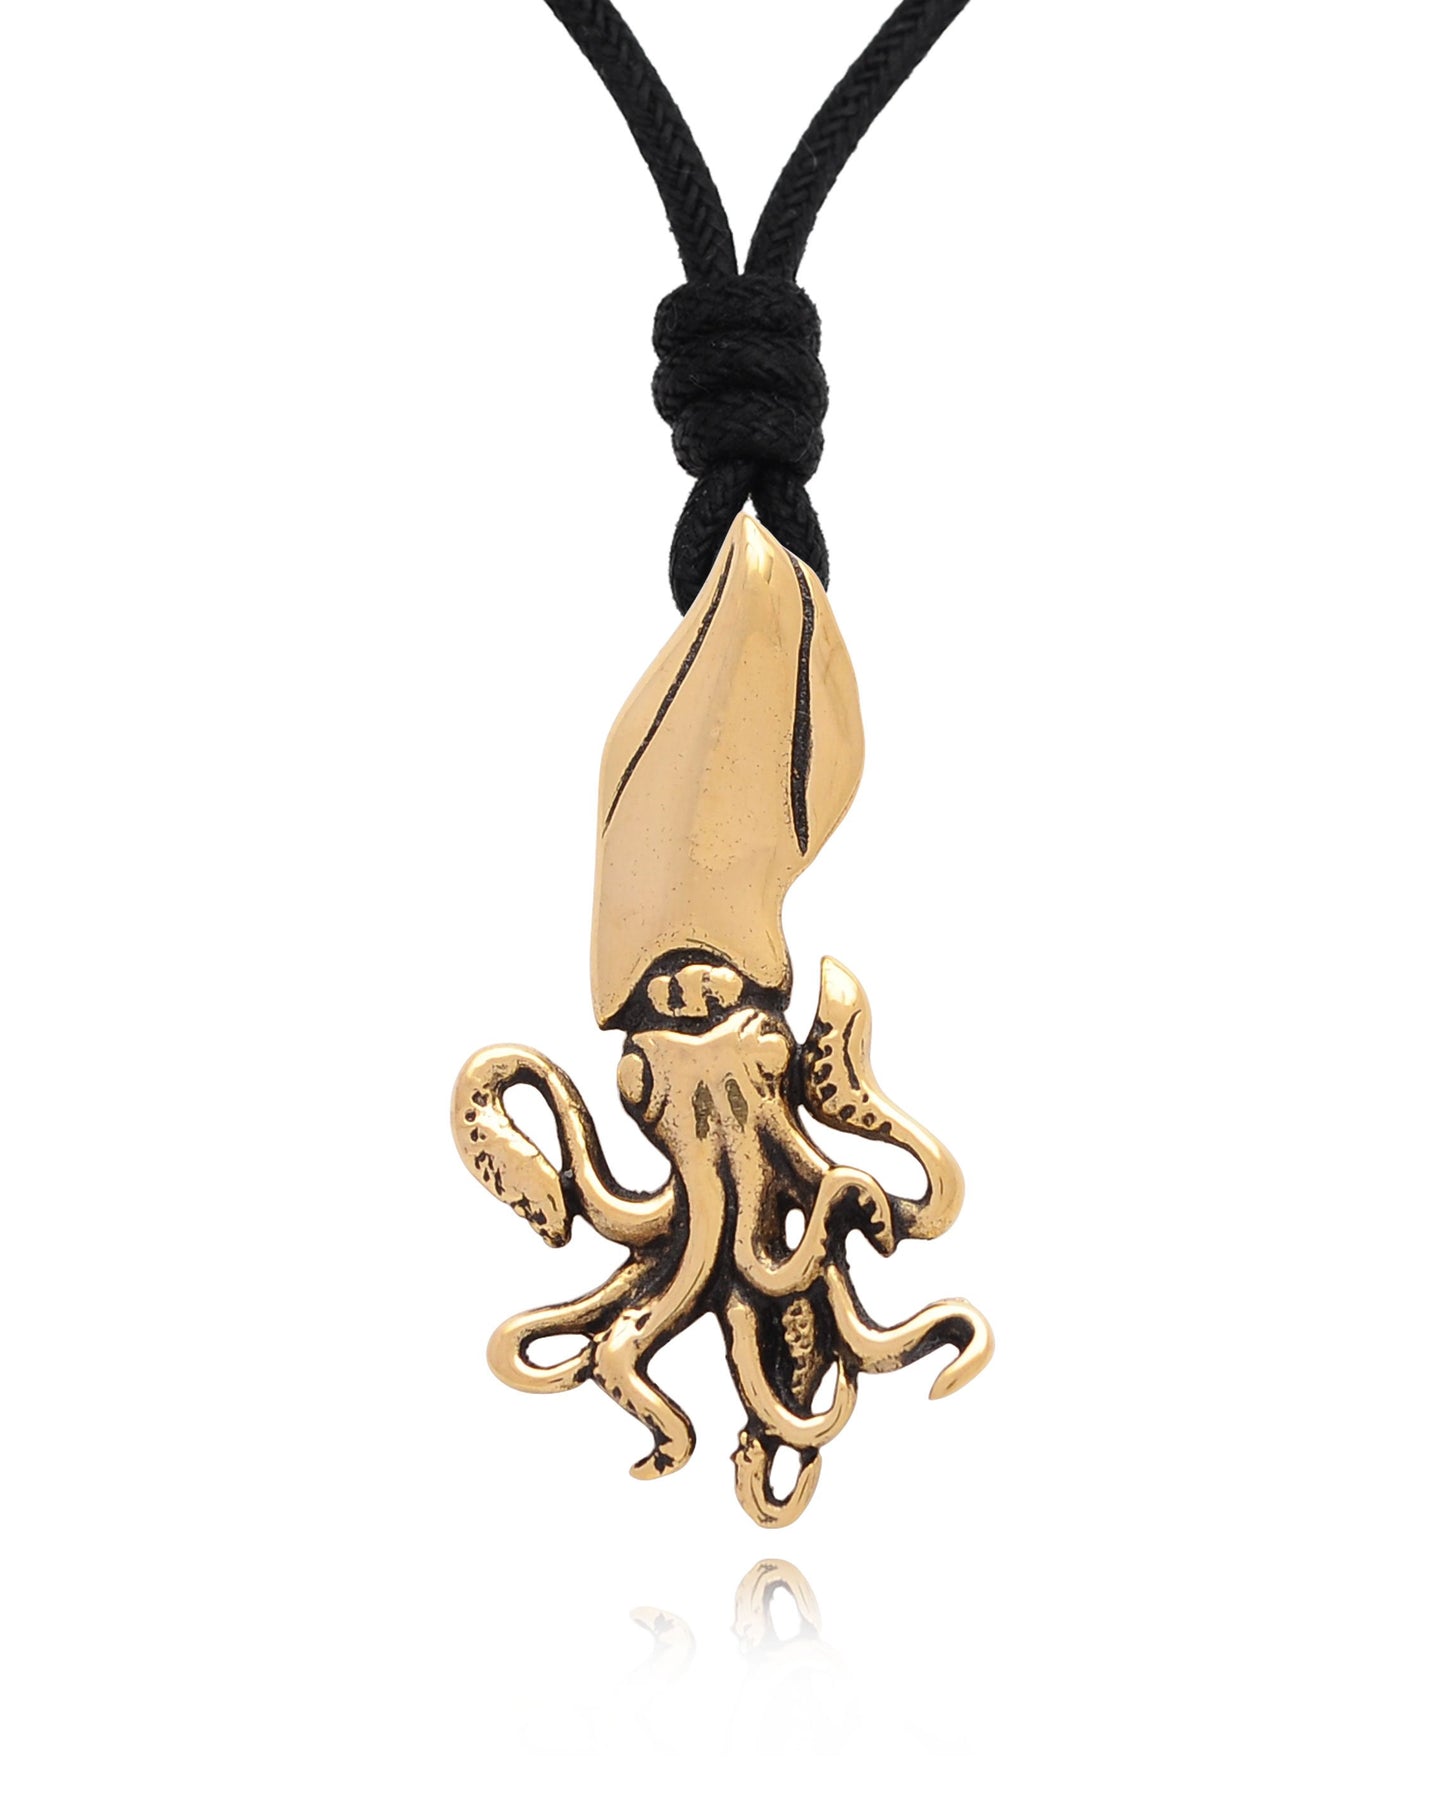 Squid Silver Inox Pewter Gold Brass Charm Necklace Pendant Jewelry